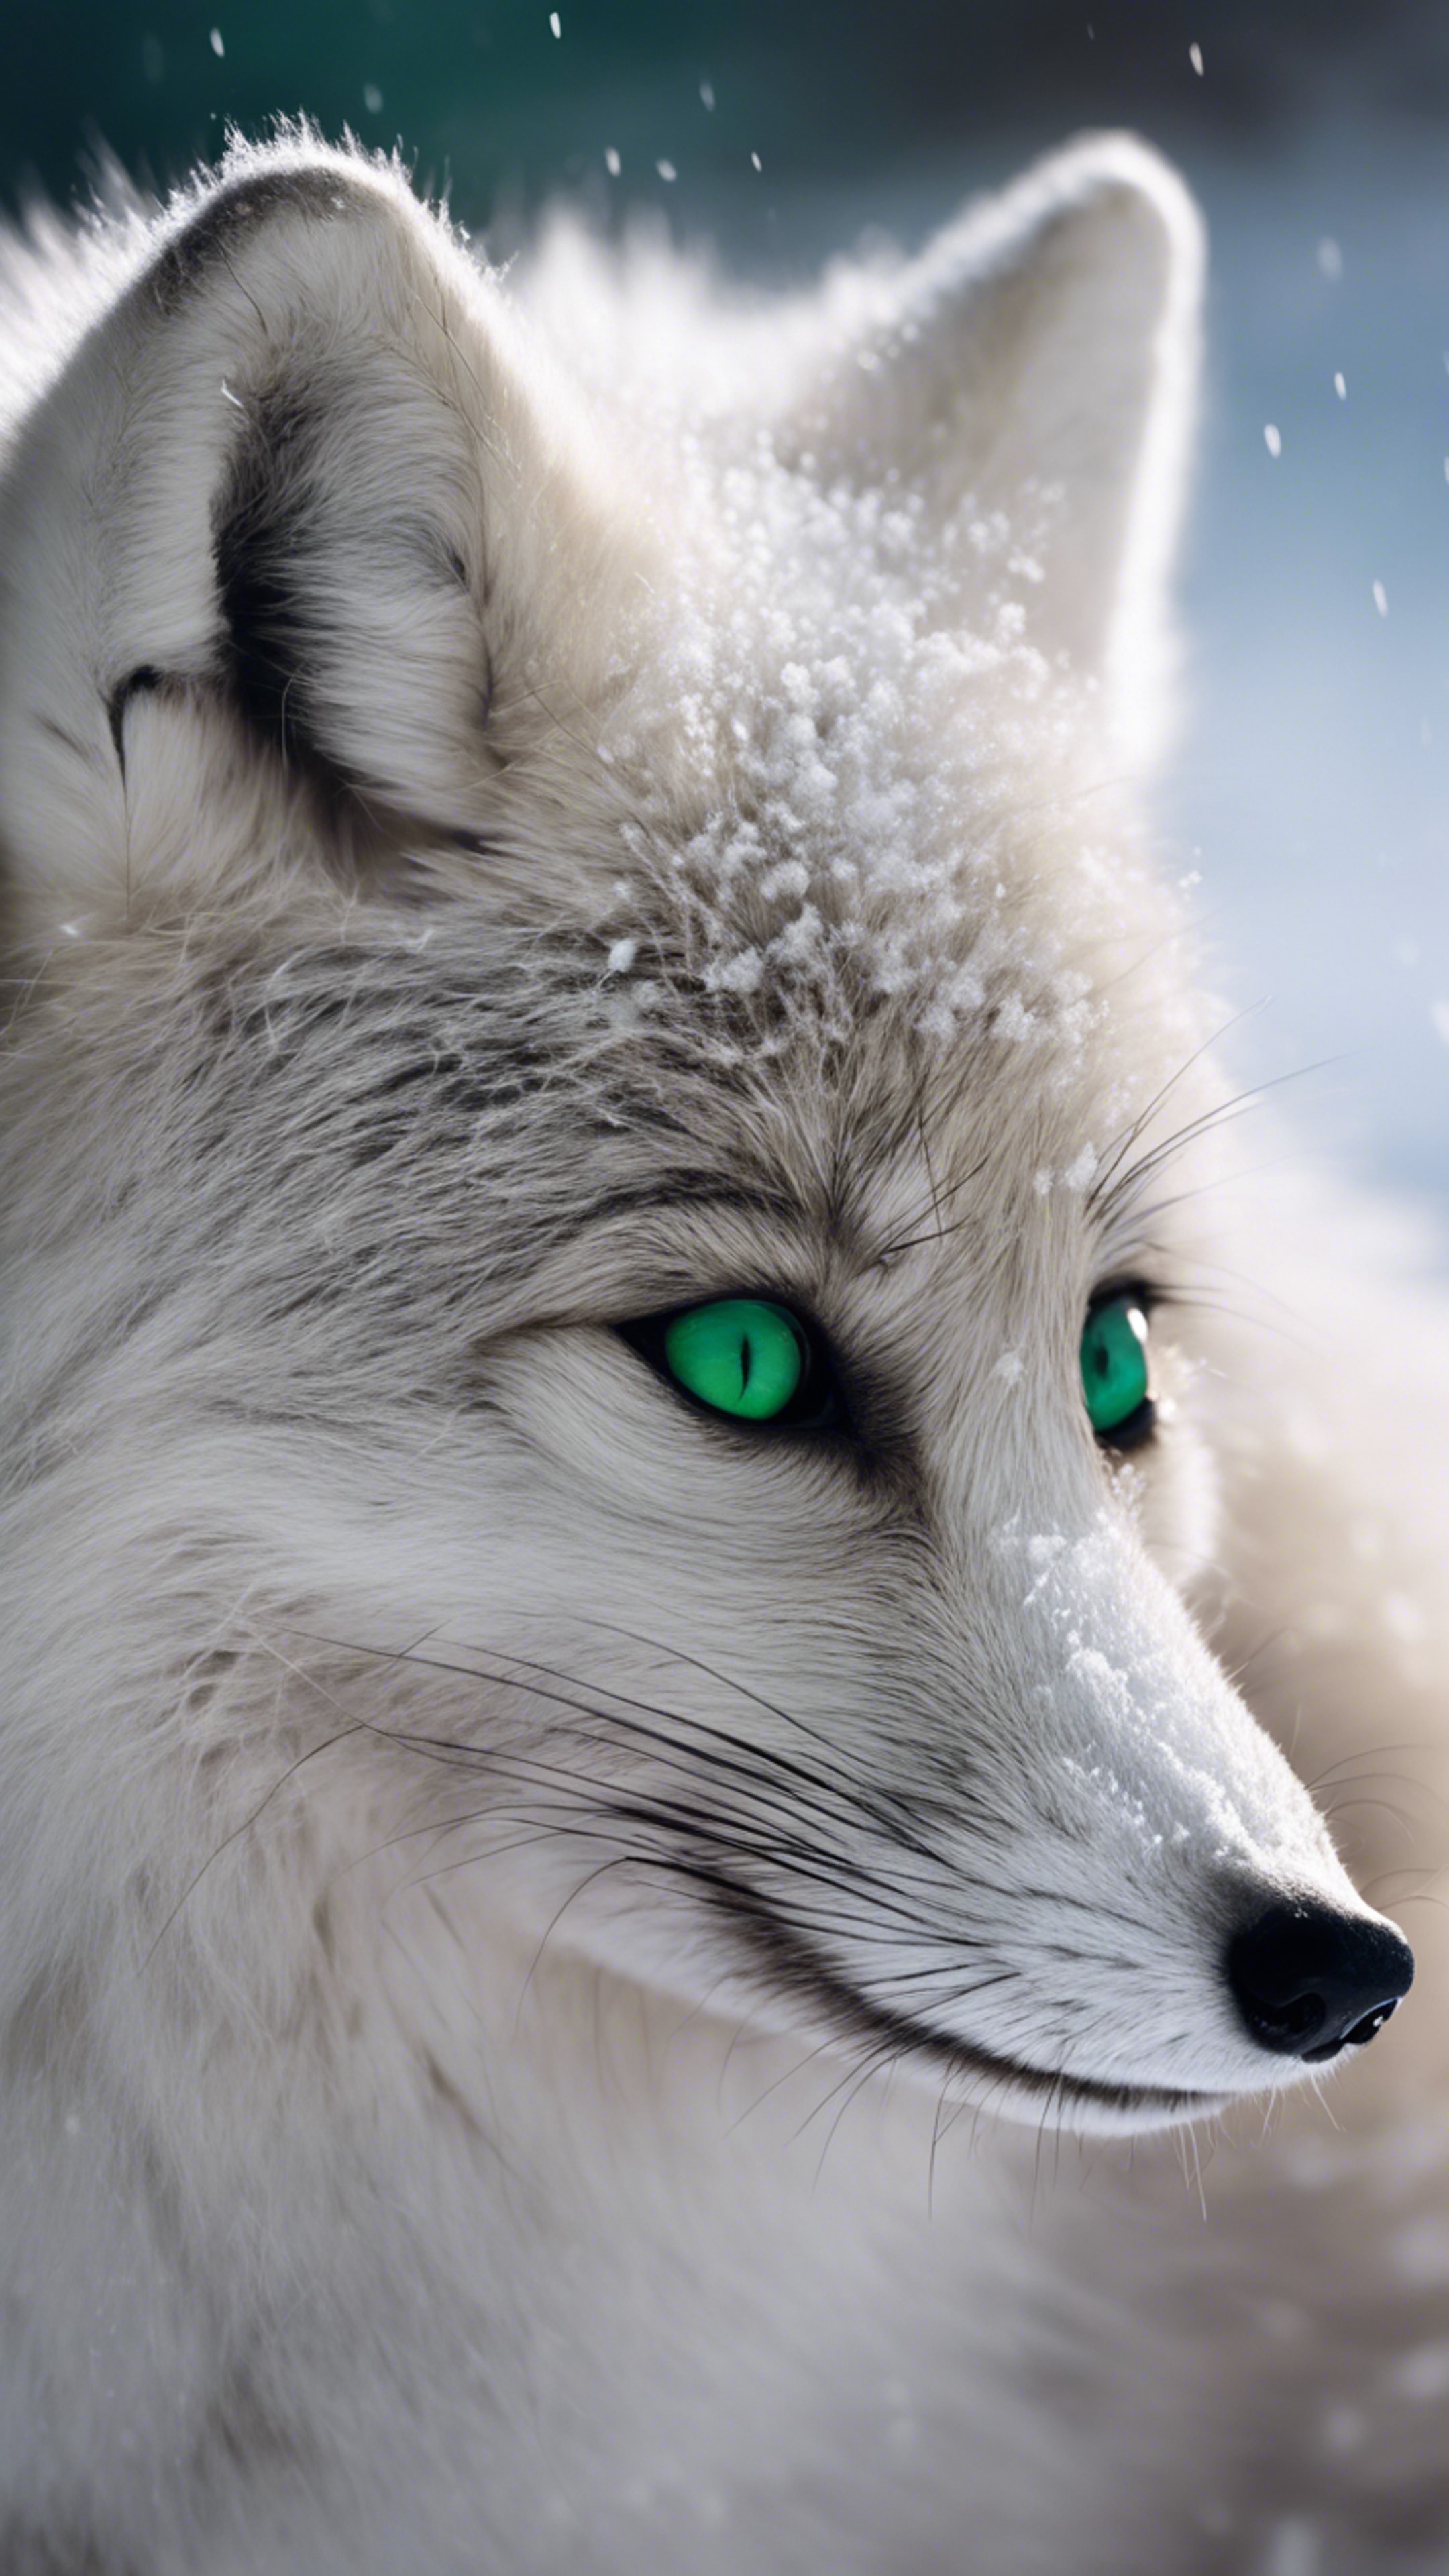 A fluffy, smoky gray arctic fox curled up in a snowy setting, its vivid green eyes staring directly at the viewer. Tapeta na zeď[a0ededdcc5bf4726bdb5]